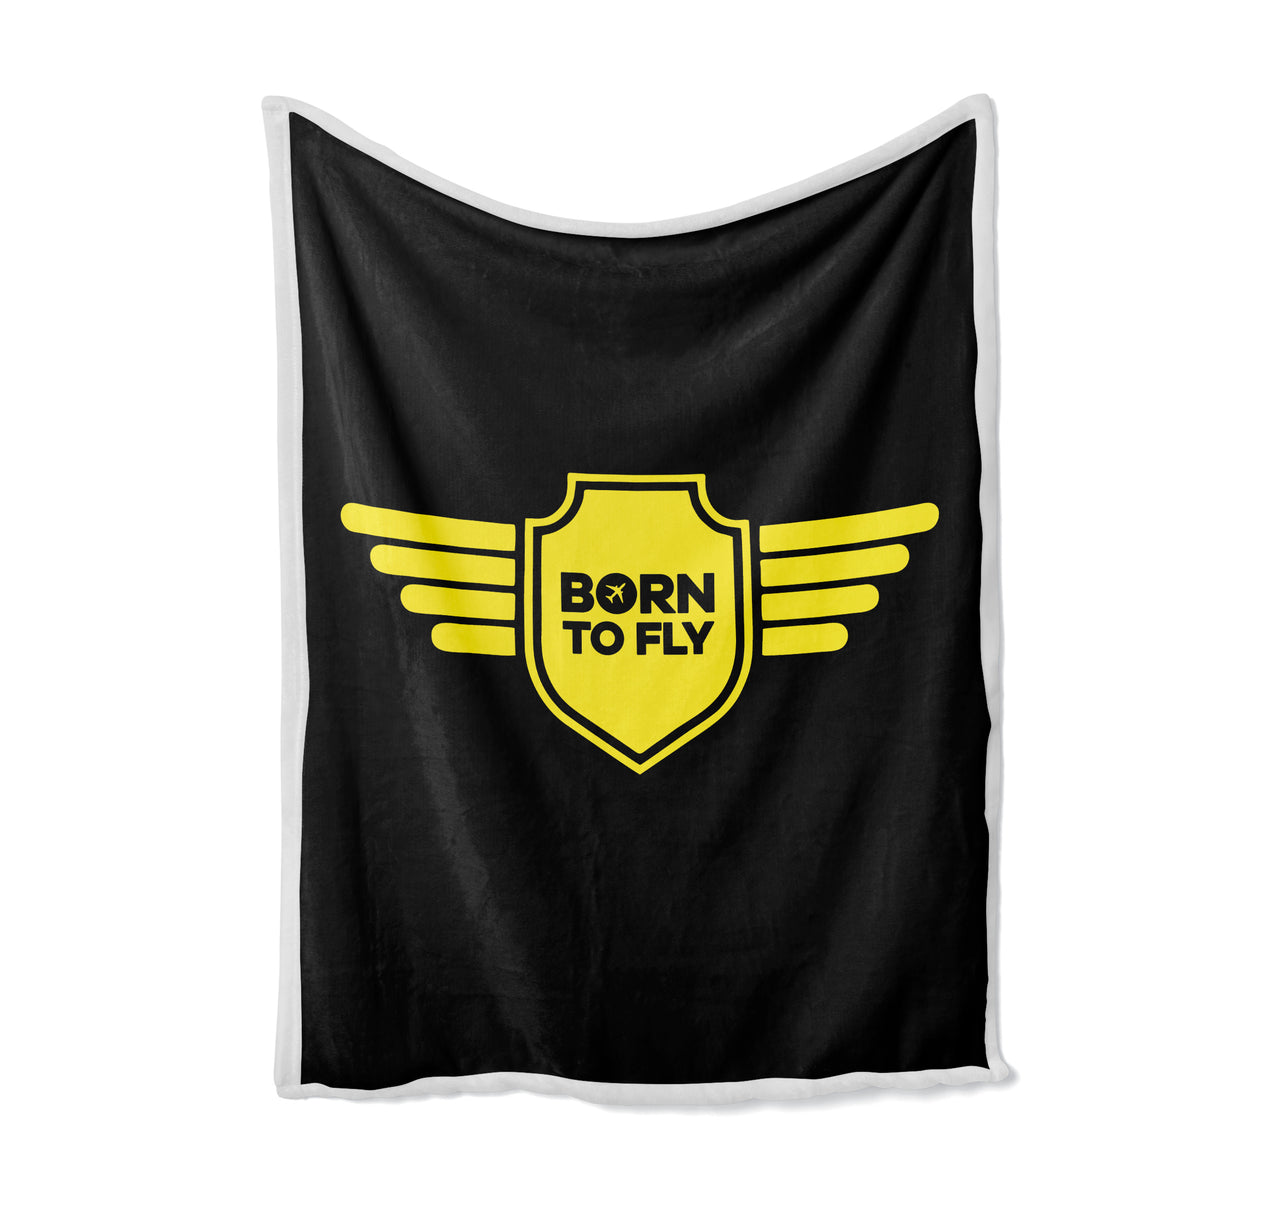 Born To Fly & Badge Designed Bed Blankets & Covers